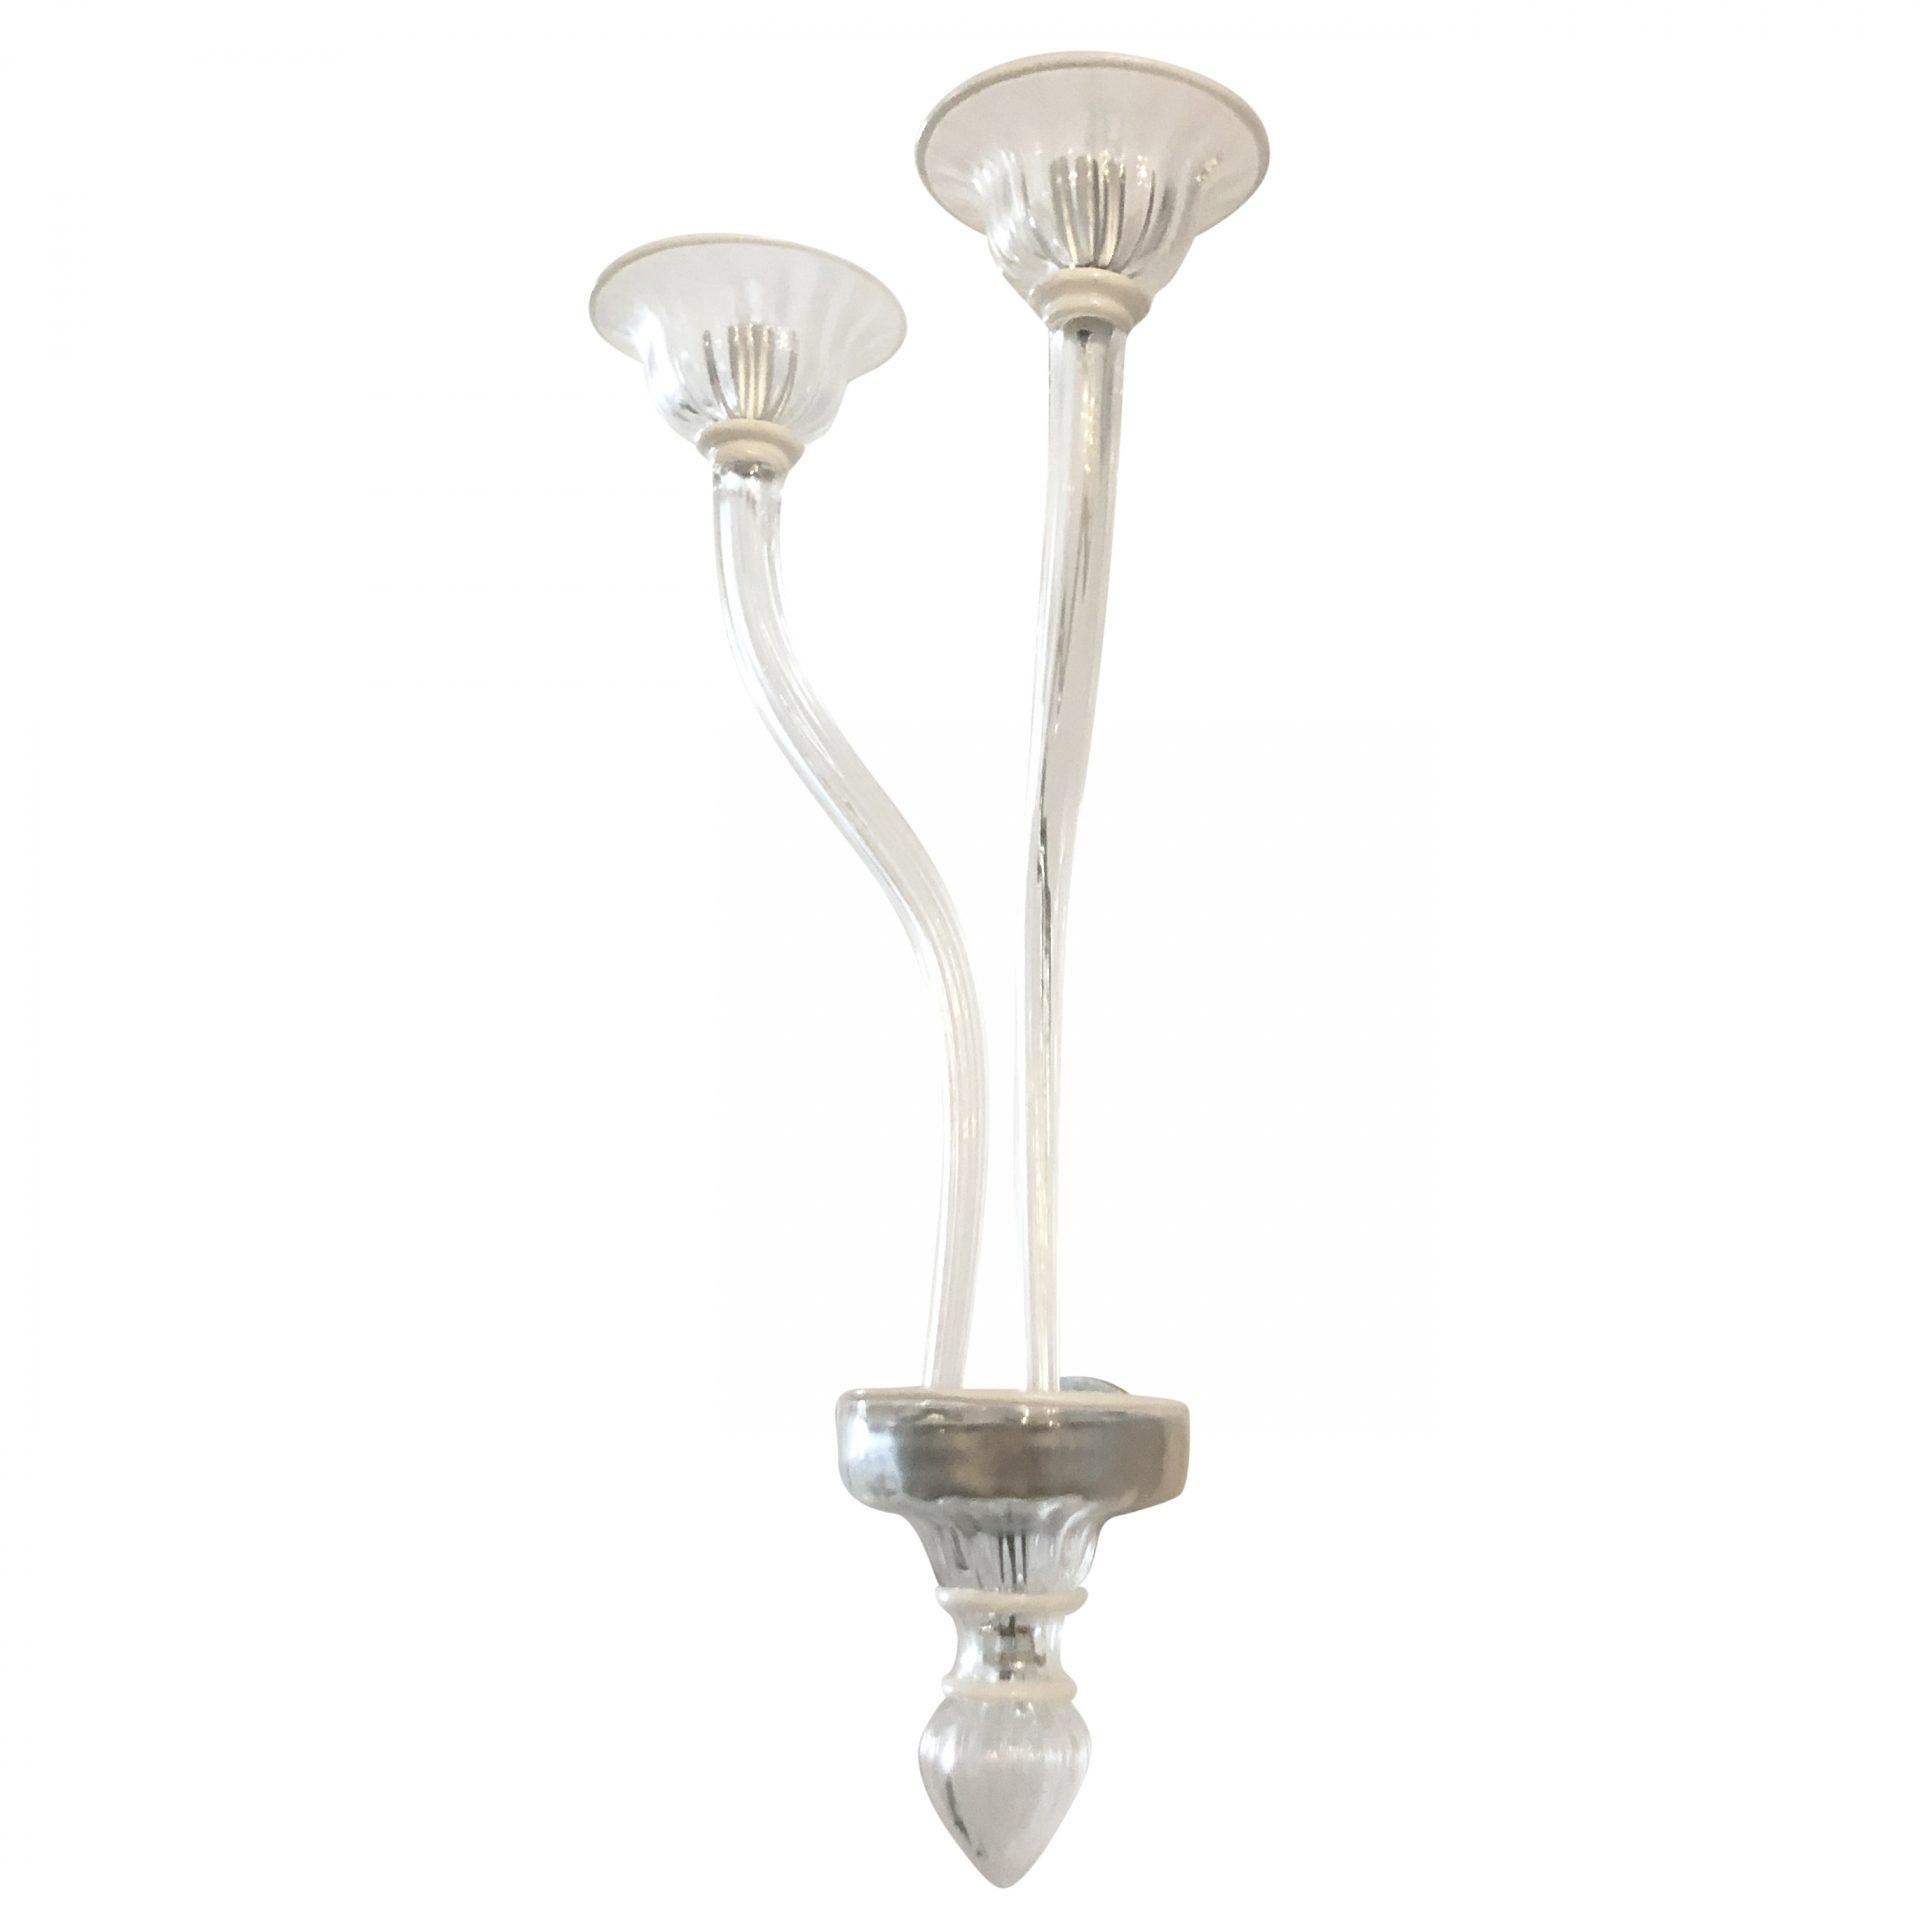 Hand-Crafted 20th Century Italian Pair of Double Arm Murano Glass Wall Sconces, Appliques For Sale